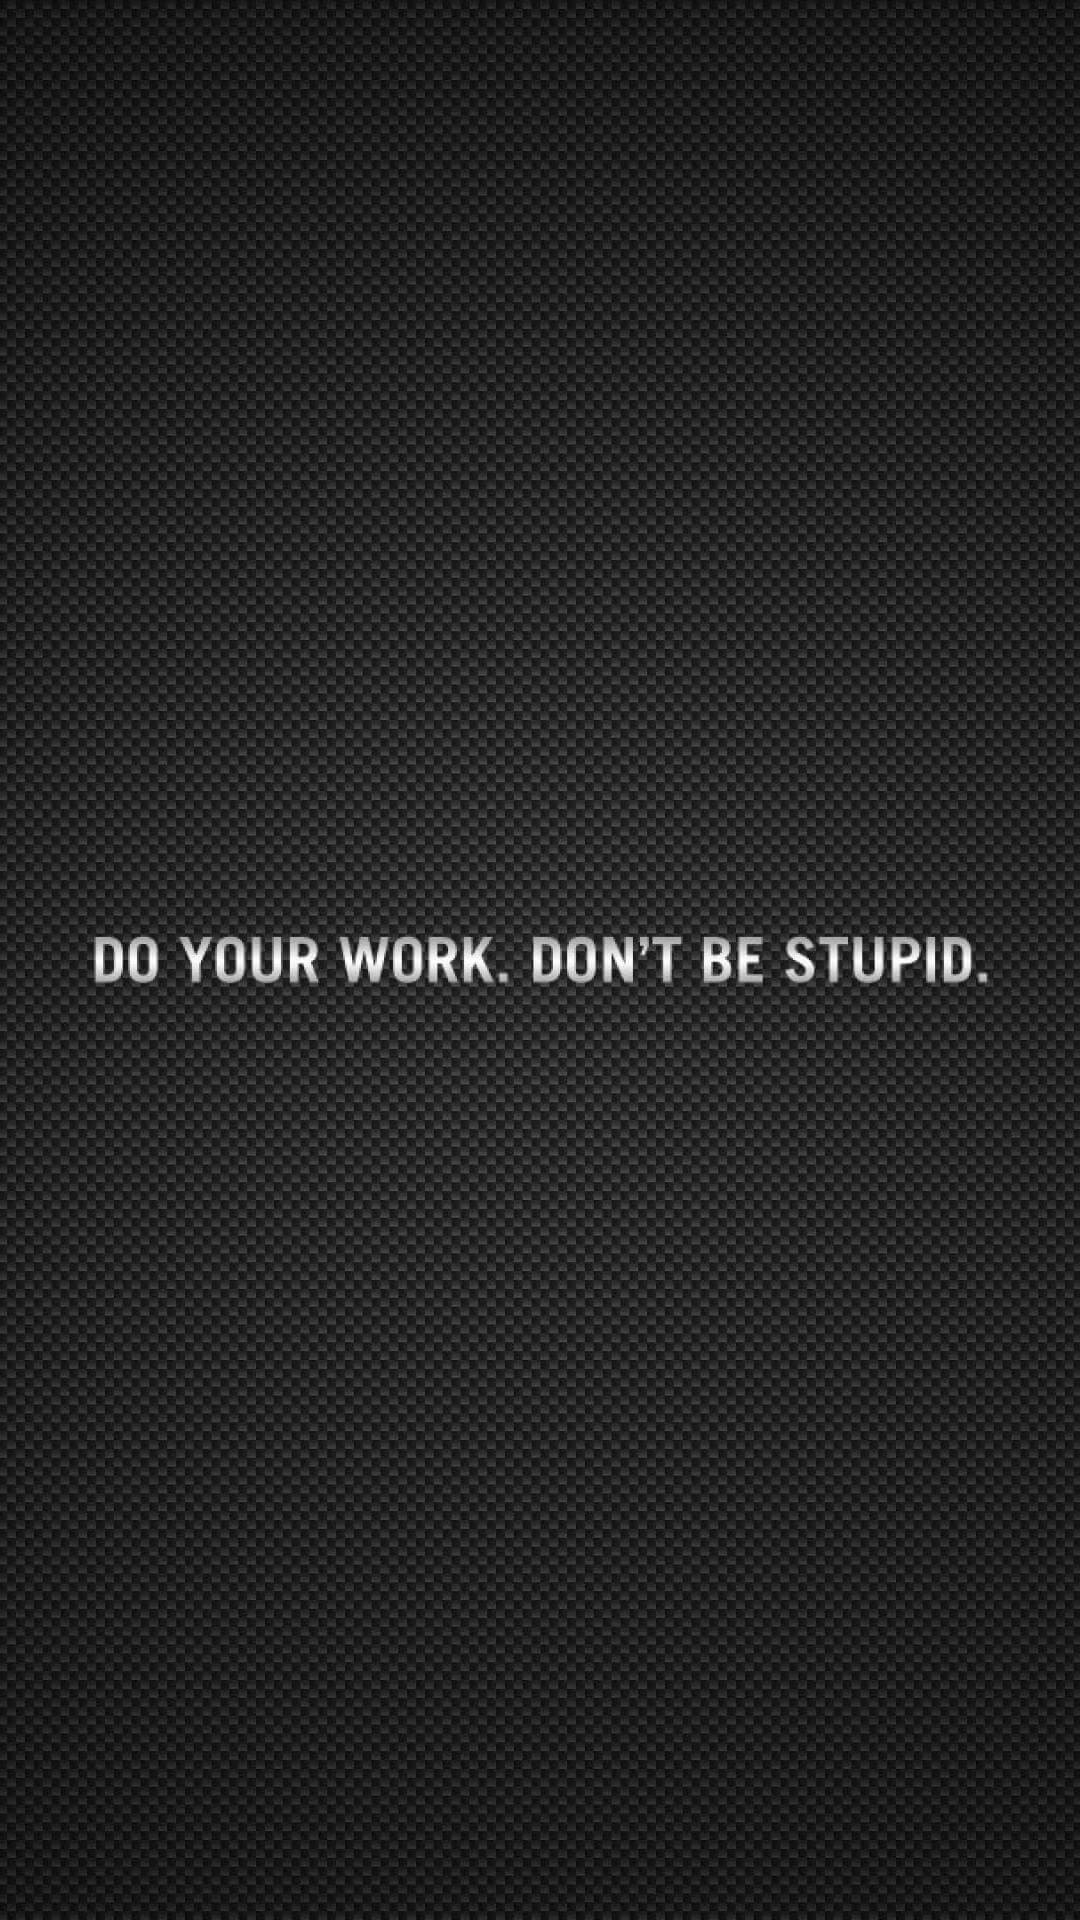 1080x1920 How to download HD Work Stupid iPhone Wallpaper:-